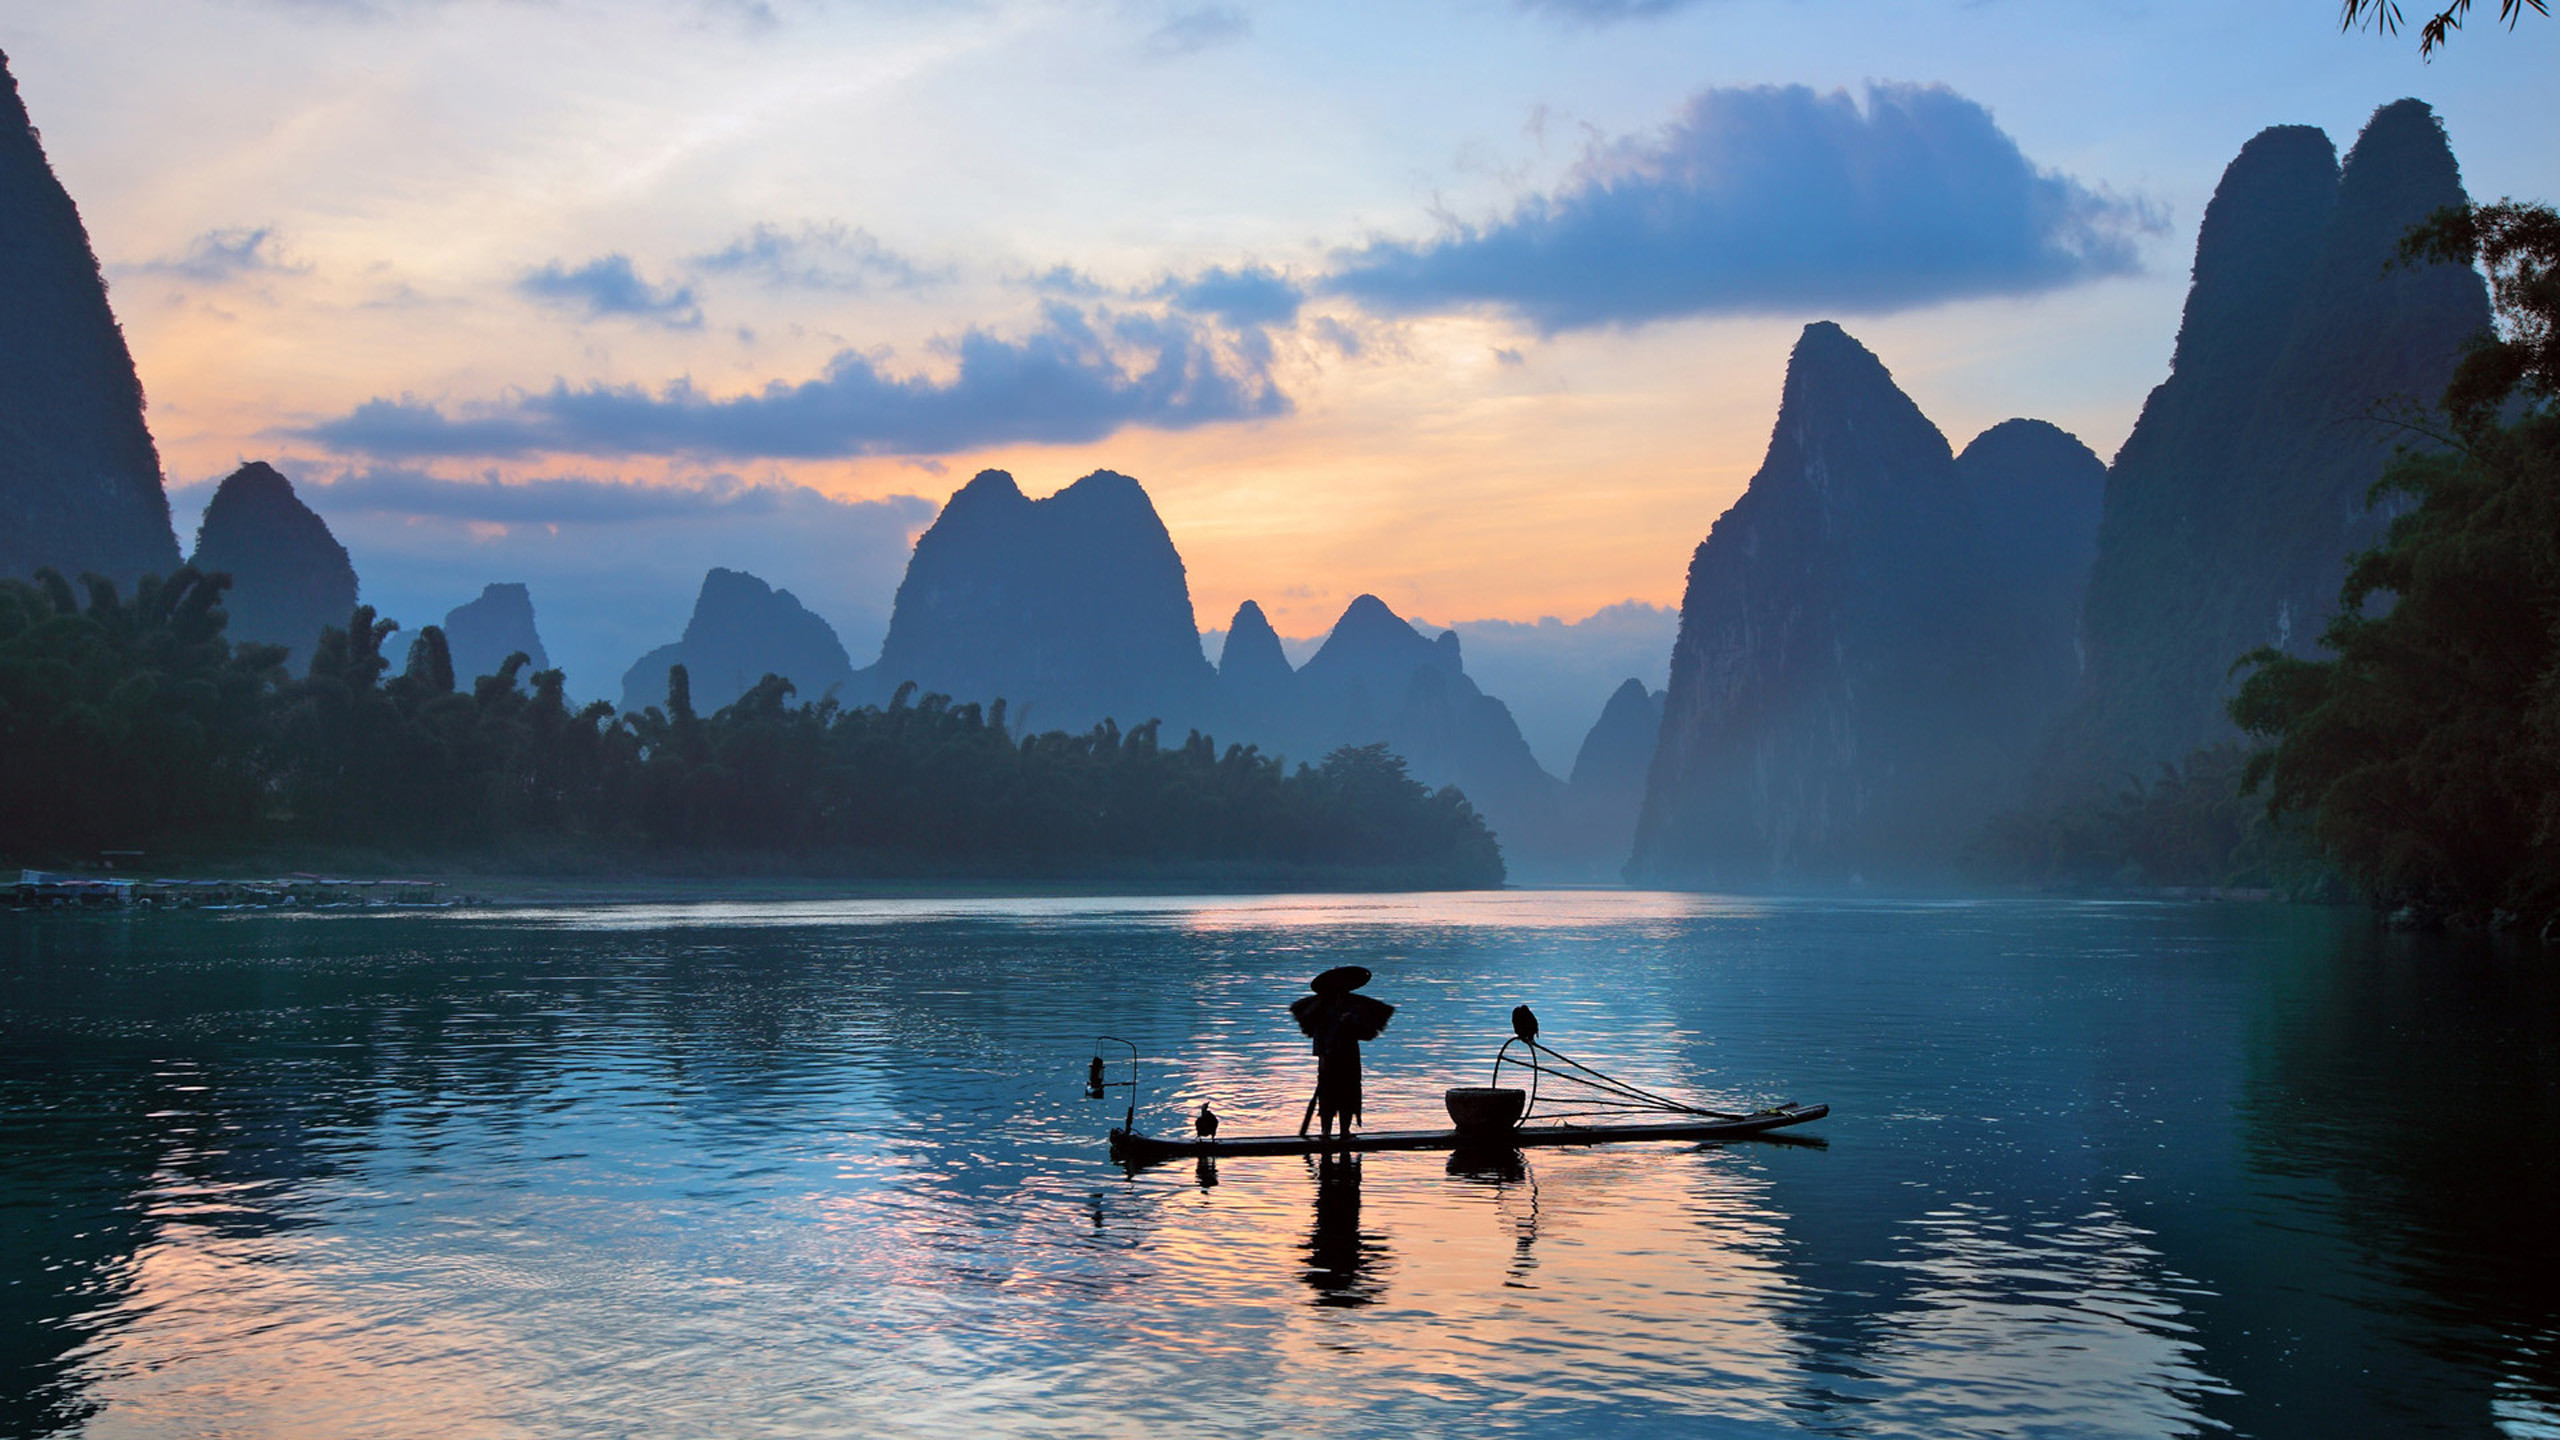 2560x1440 China, Guilin, Scenery (Inspiration for acrylic painting)